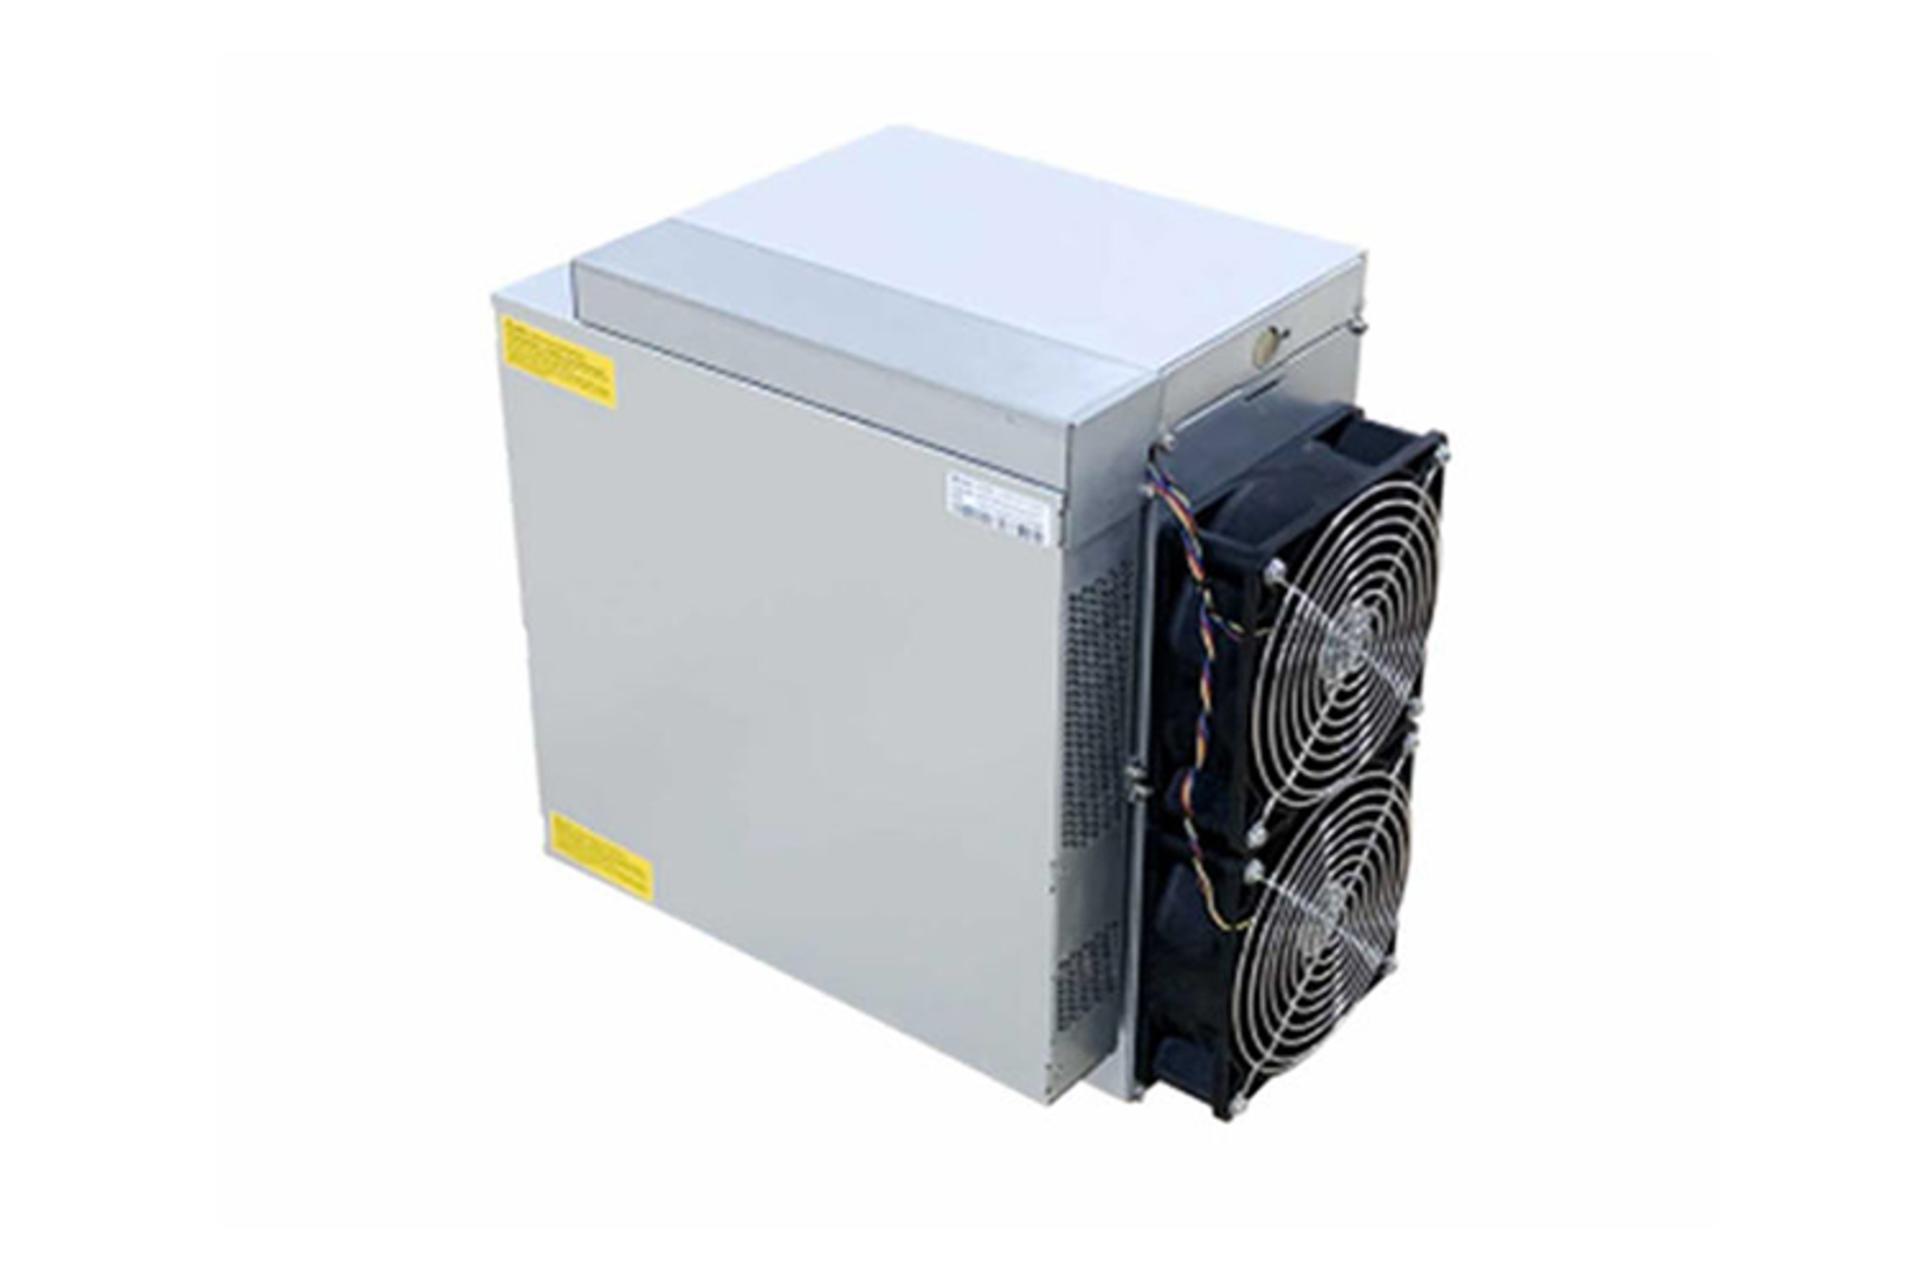 Bitmain Antminer T17+ / ماینر Bitmain Antminer T17+